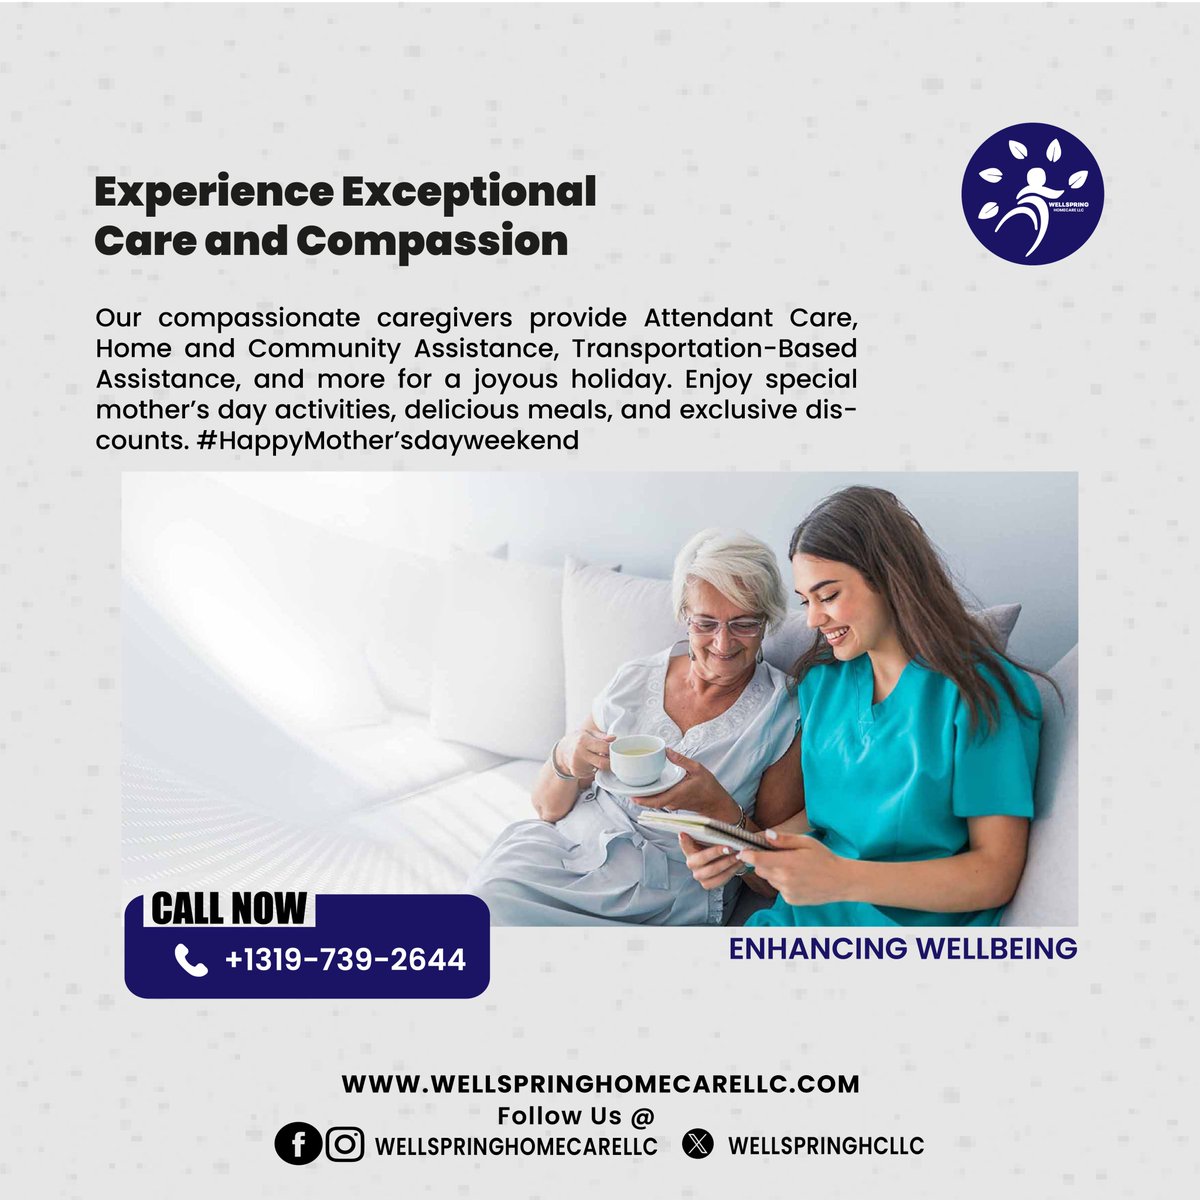 Wellspring Homecare LLC provides compassionate and personalized home care services tailored to meet your loved one's unique needs, ensuring comfort and peace of mind for your family. #WellspringHomecare #HomeCareServices #CompassionateCare #PersonalizedSupport #ElderlyCare